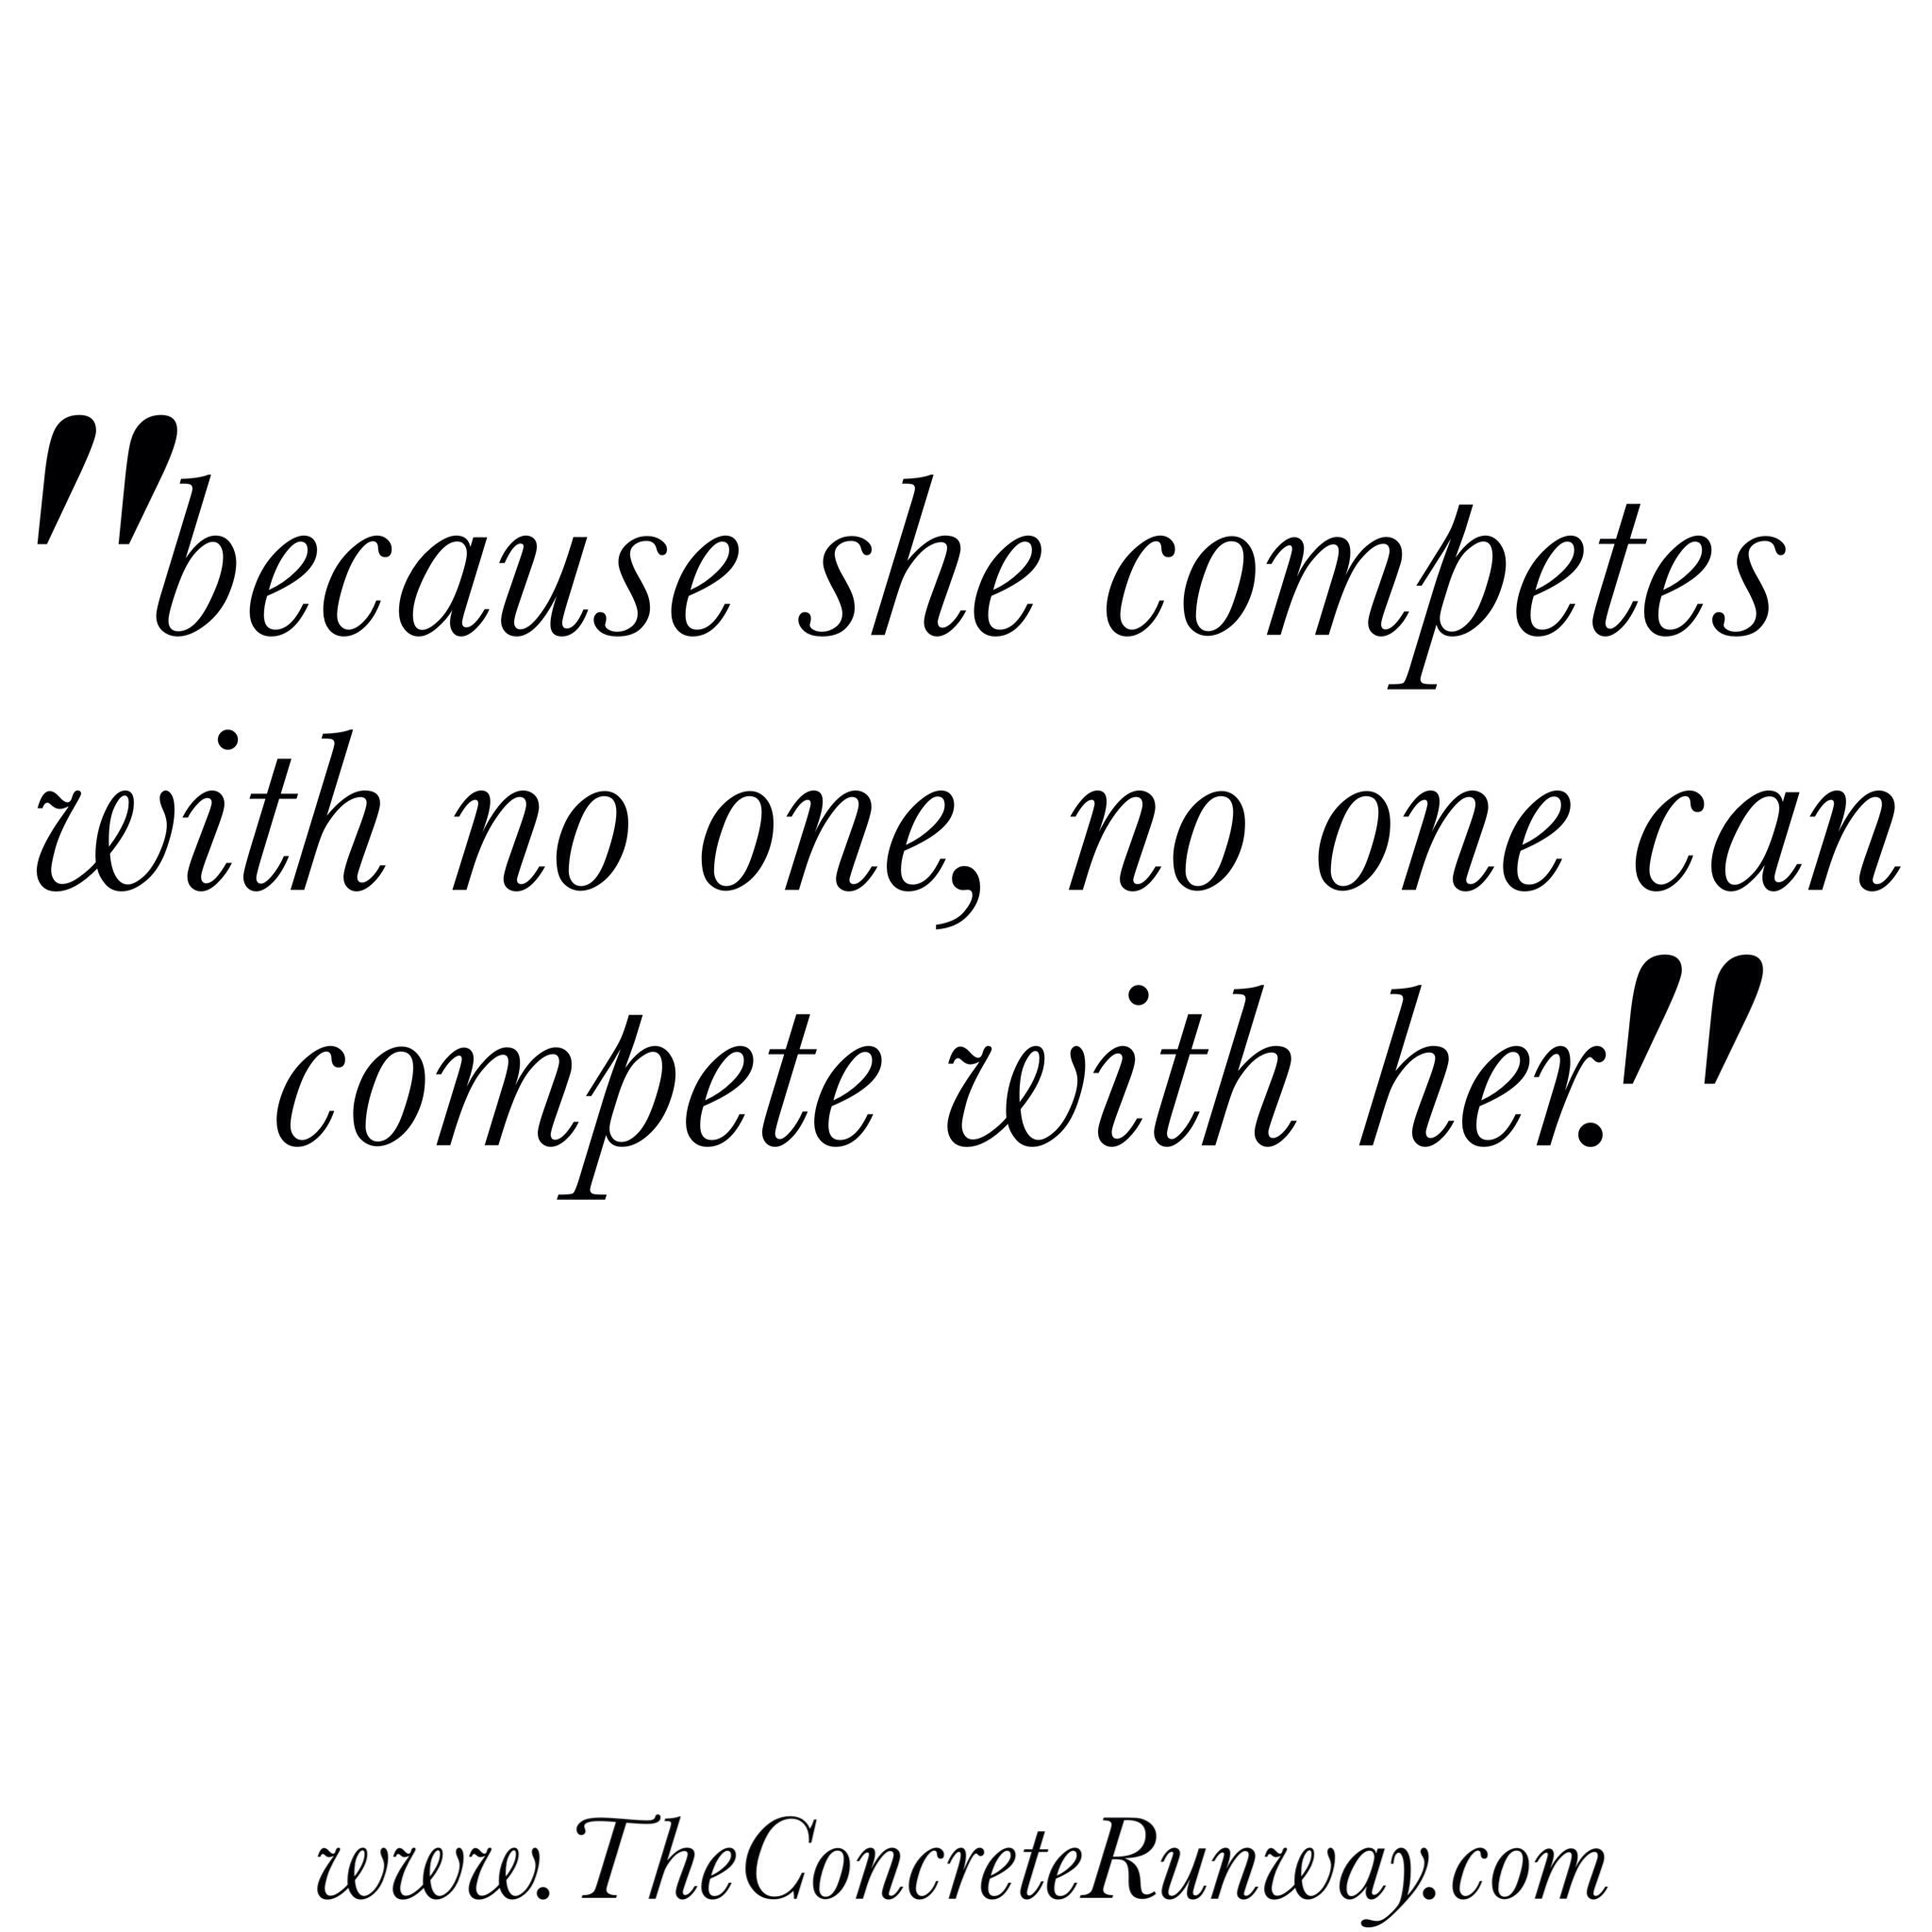 Because she competes with no one, no one can compete with her